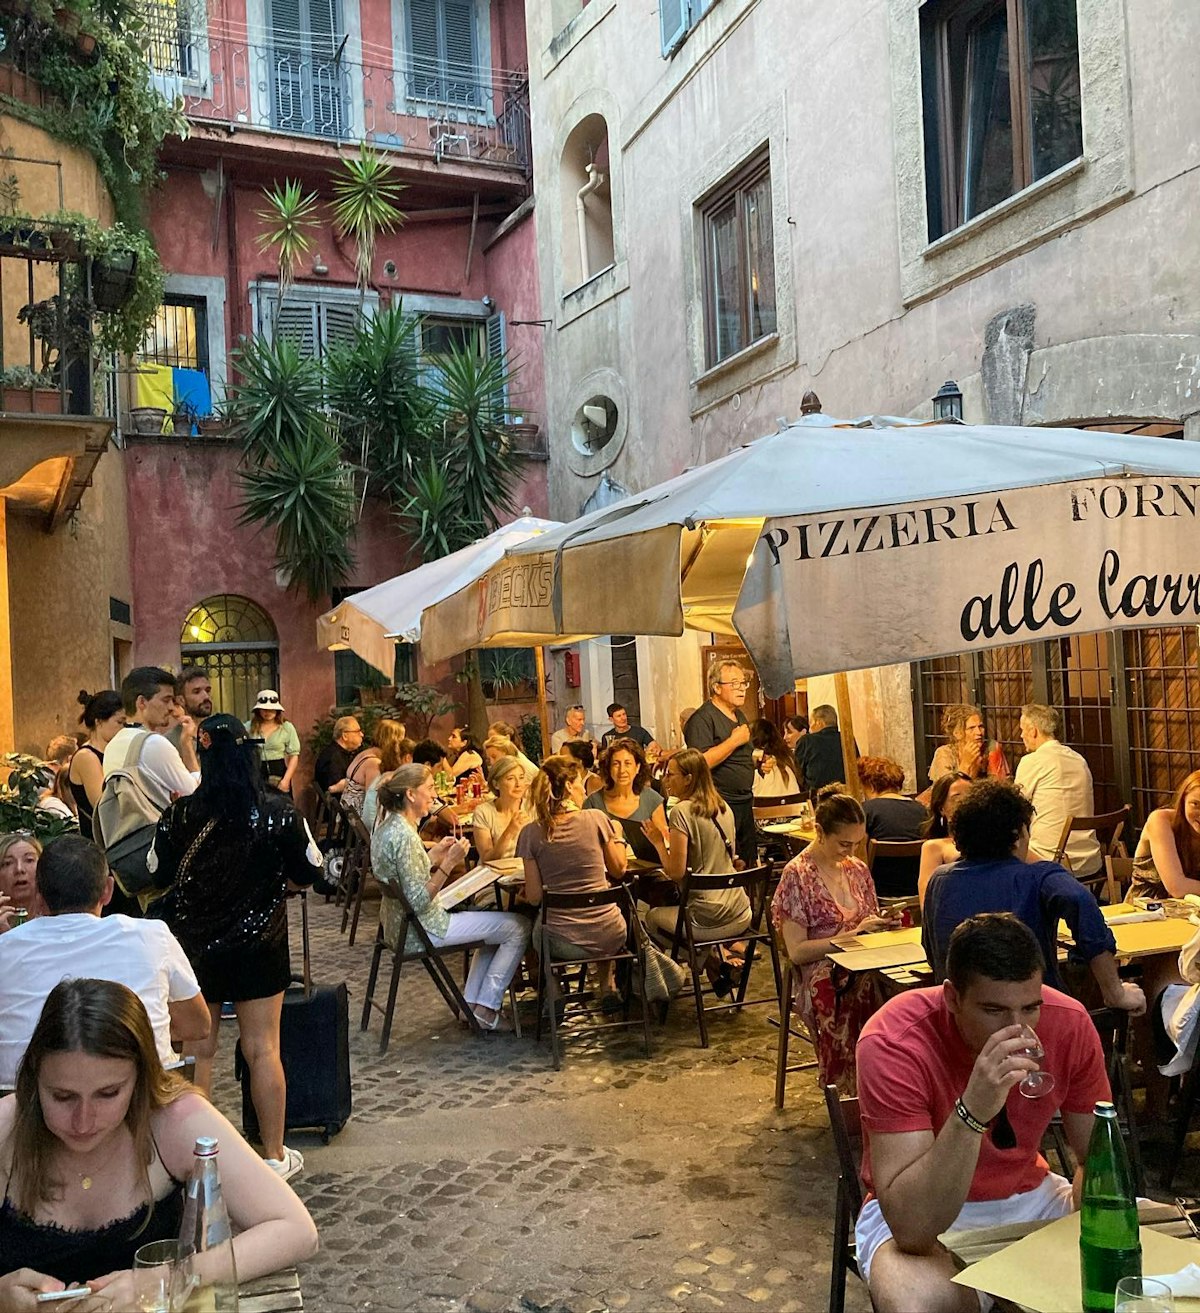 Pizzeria Alle Corrette Unassuming pizzeria drawing a local crowd for Roman-style pies, wine & desserts.